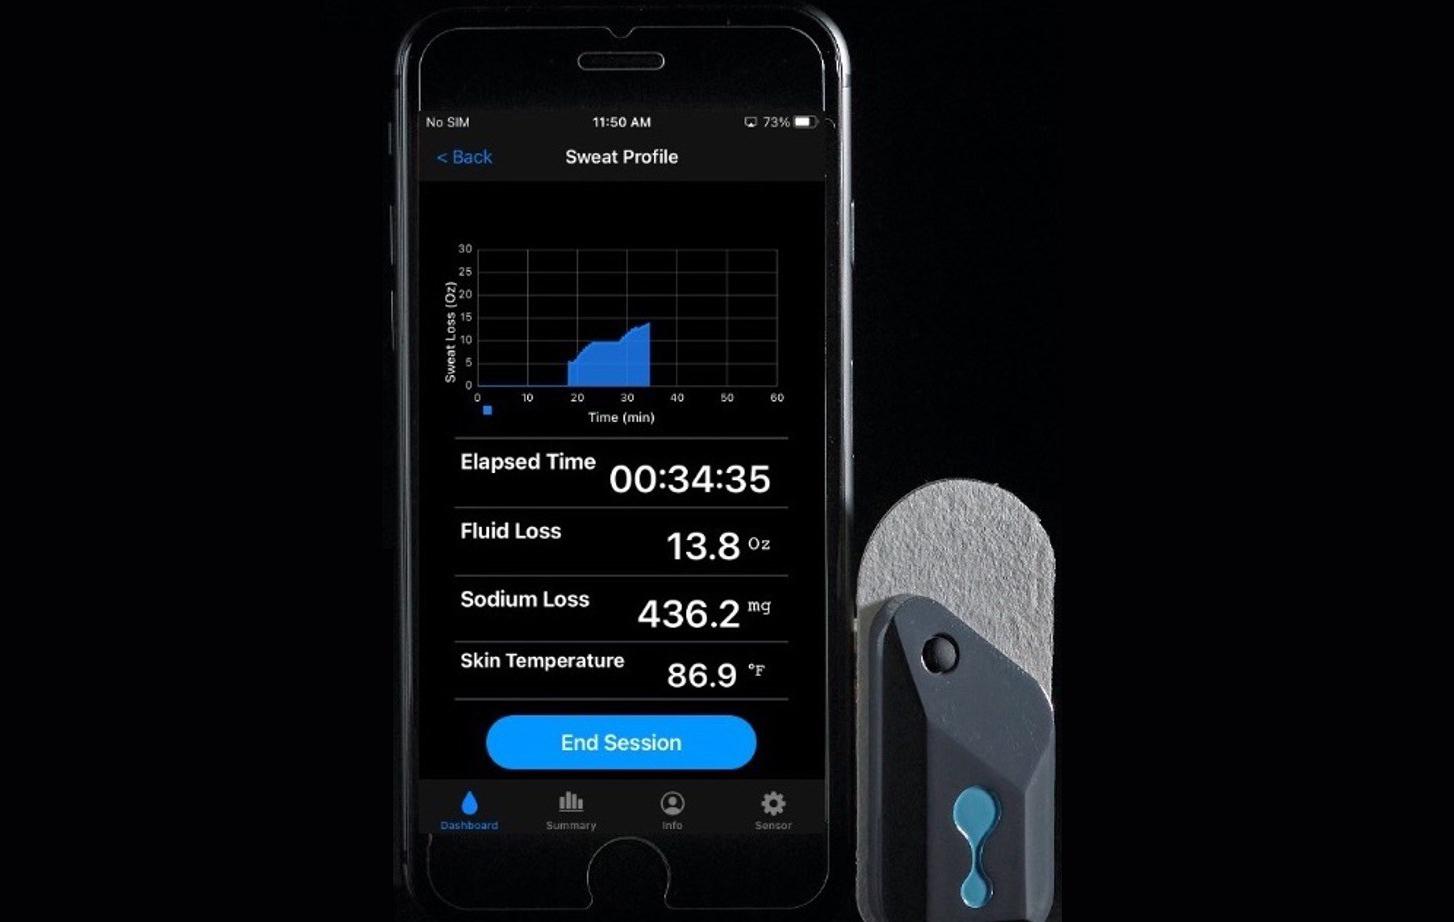 Epicore Biosystems' wearable can measure sweat biometrics and deliver insights to a user's smartphone via an app / Epicore Biosystems